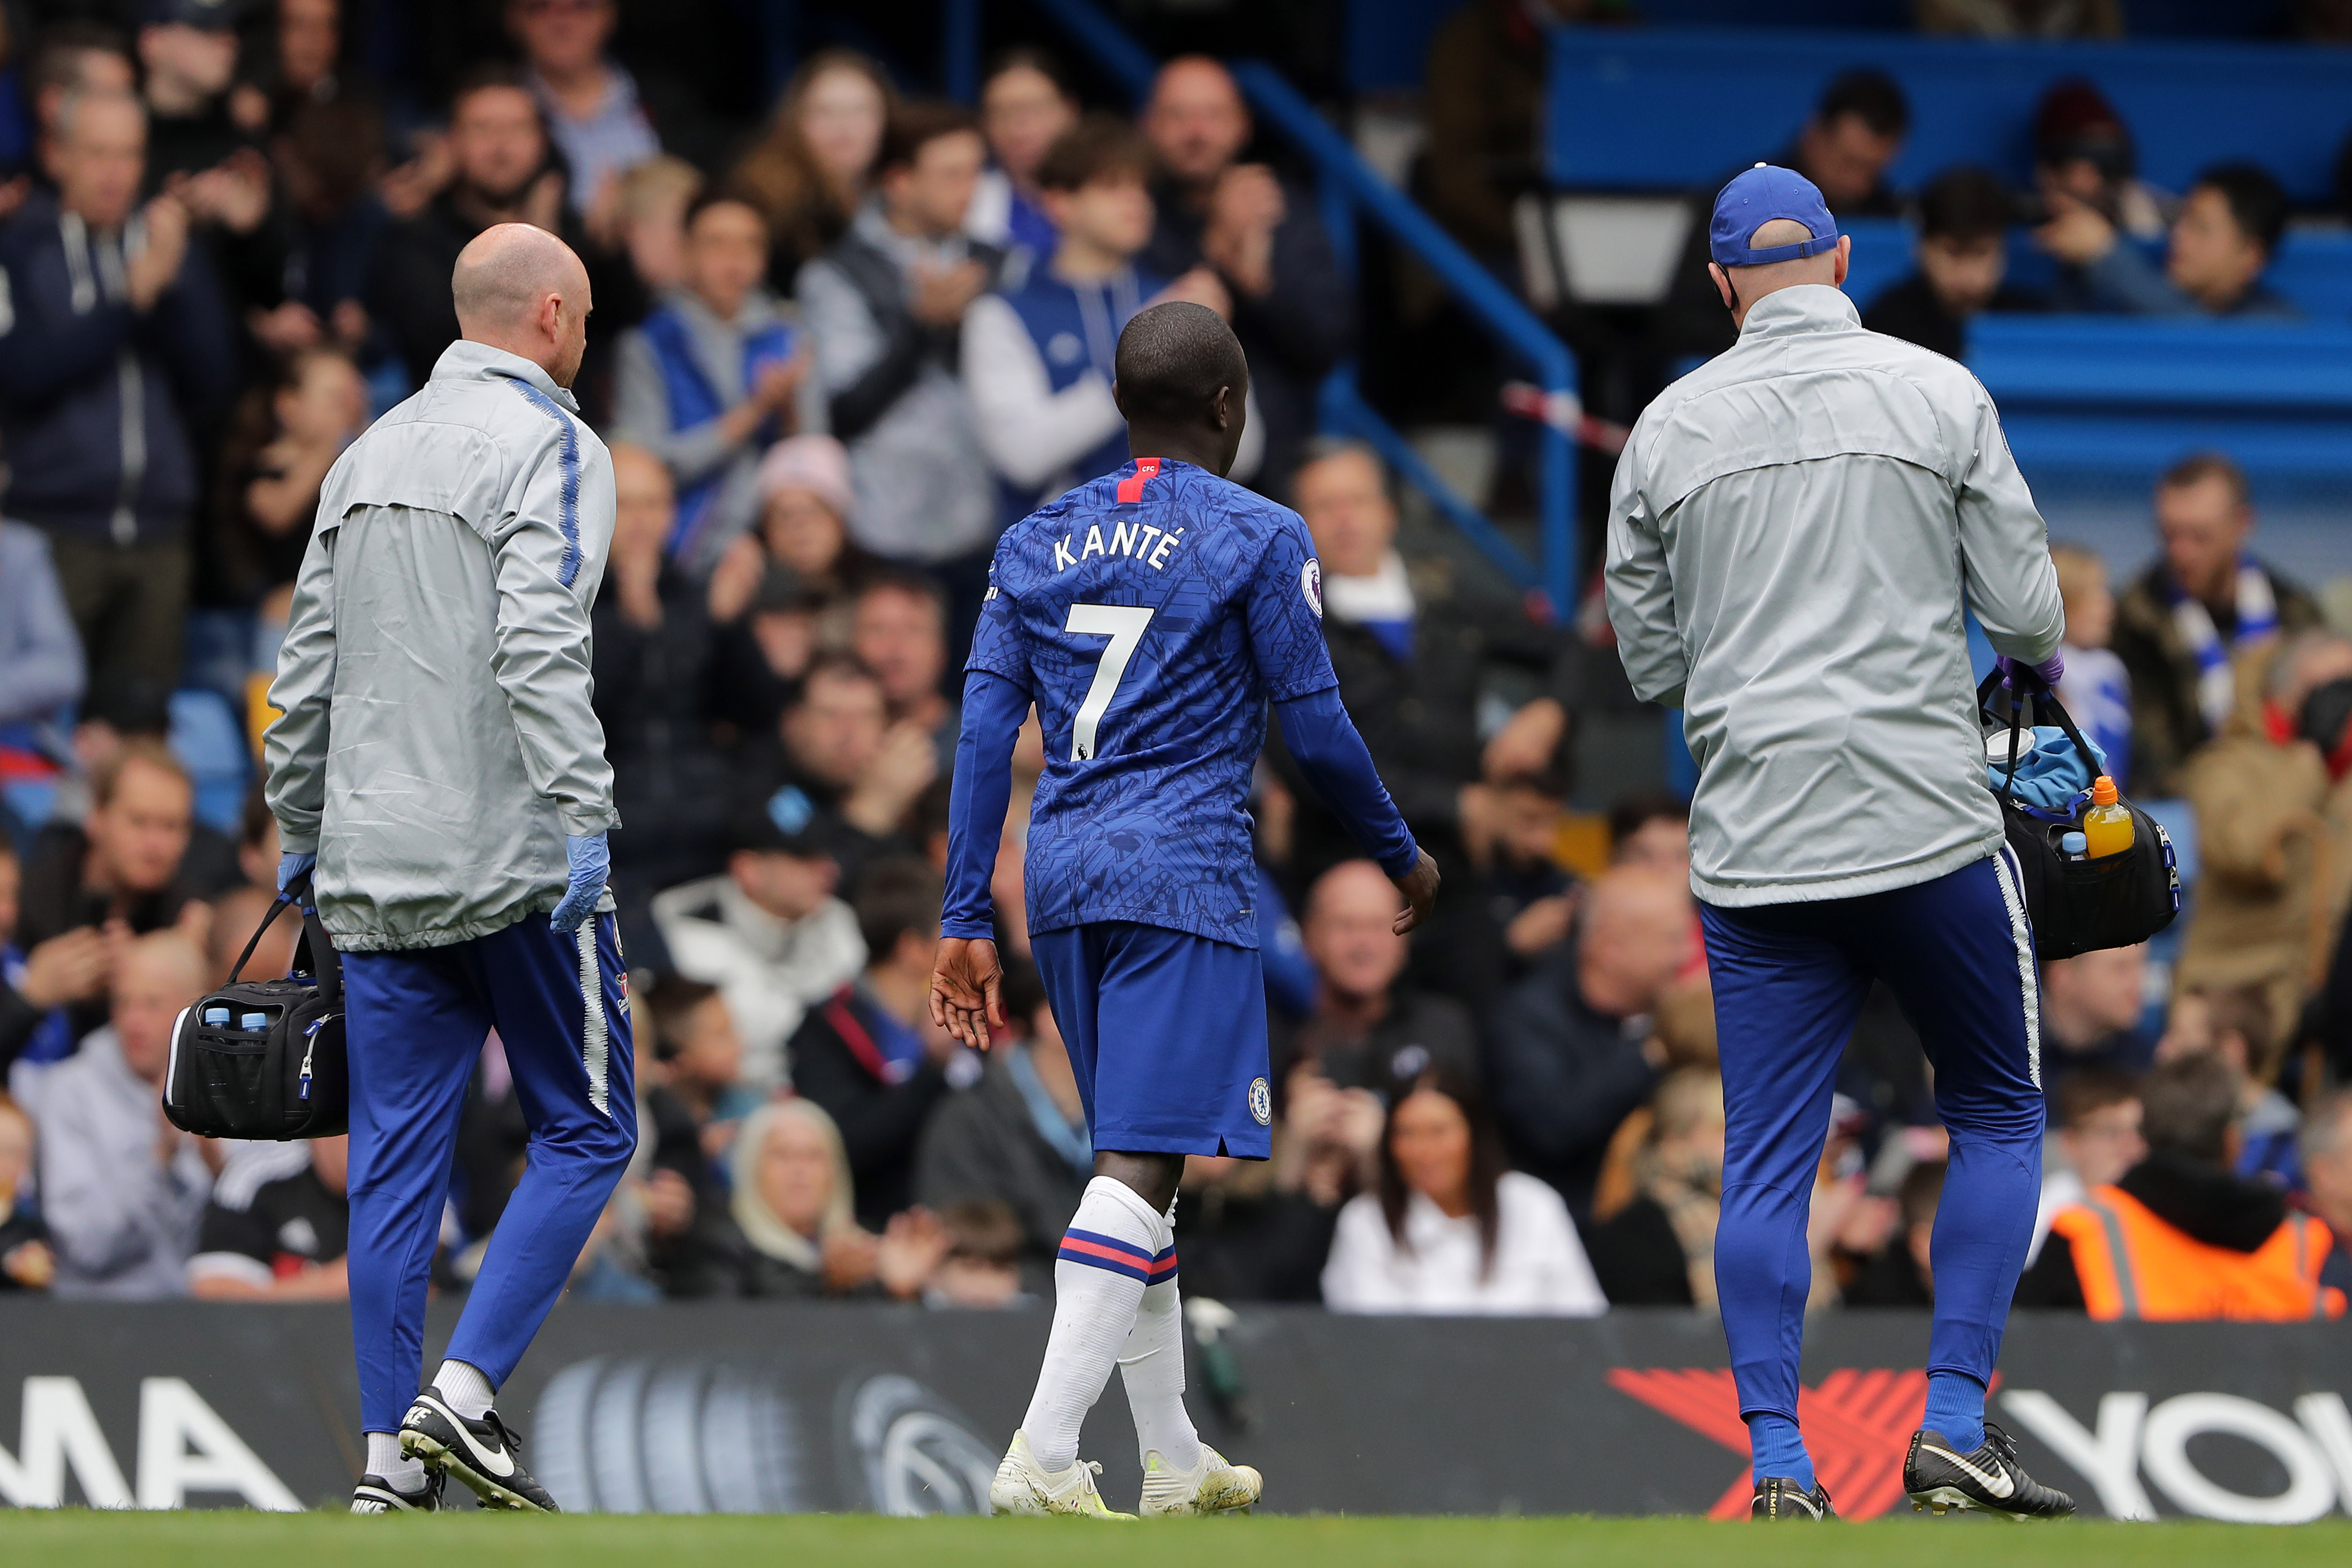 Kante is ruled out for Chelsea (Photo by Richard Heathcote/Getty Images)